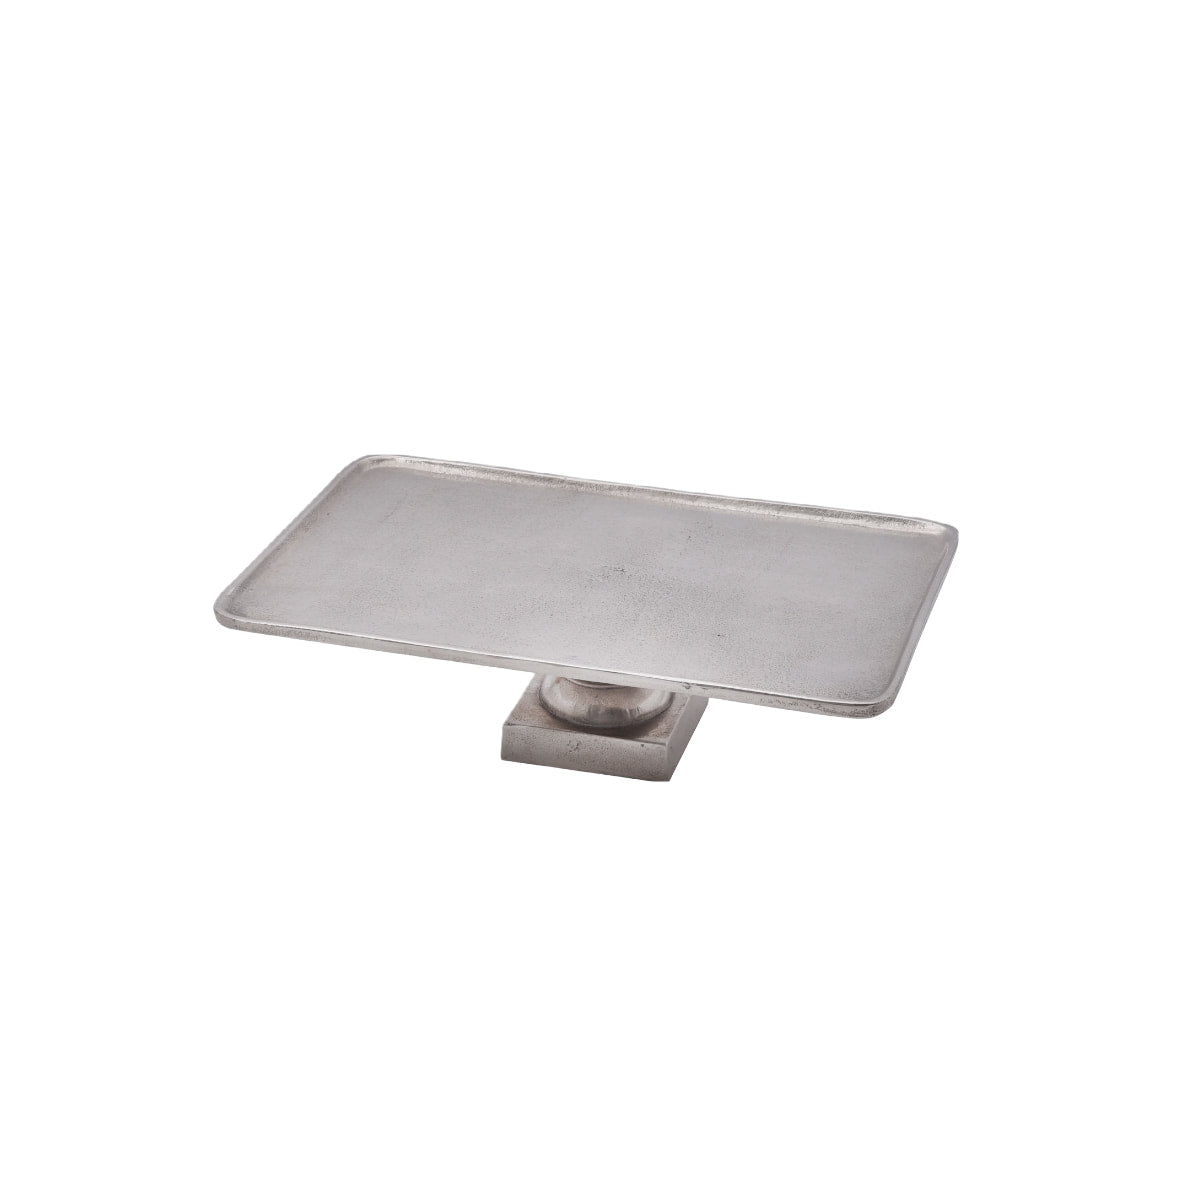 Aluminum Tray on Stand - Large